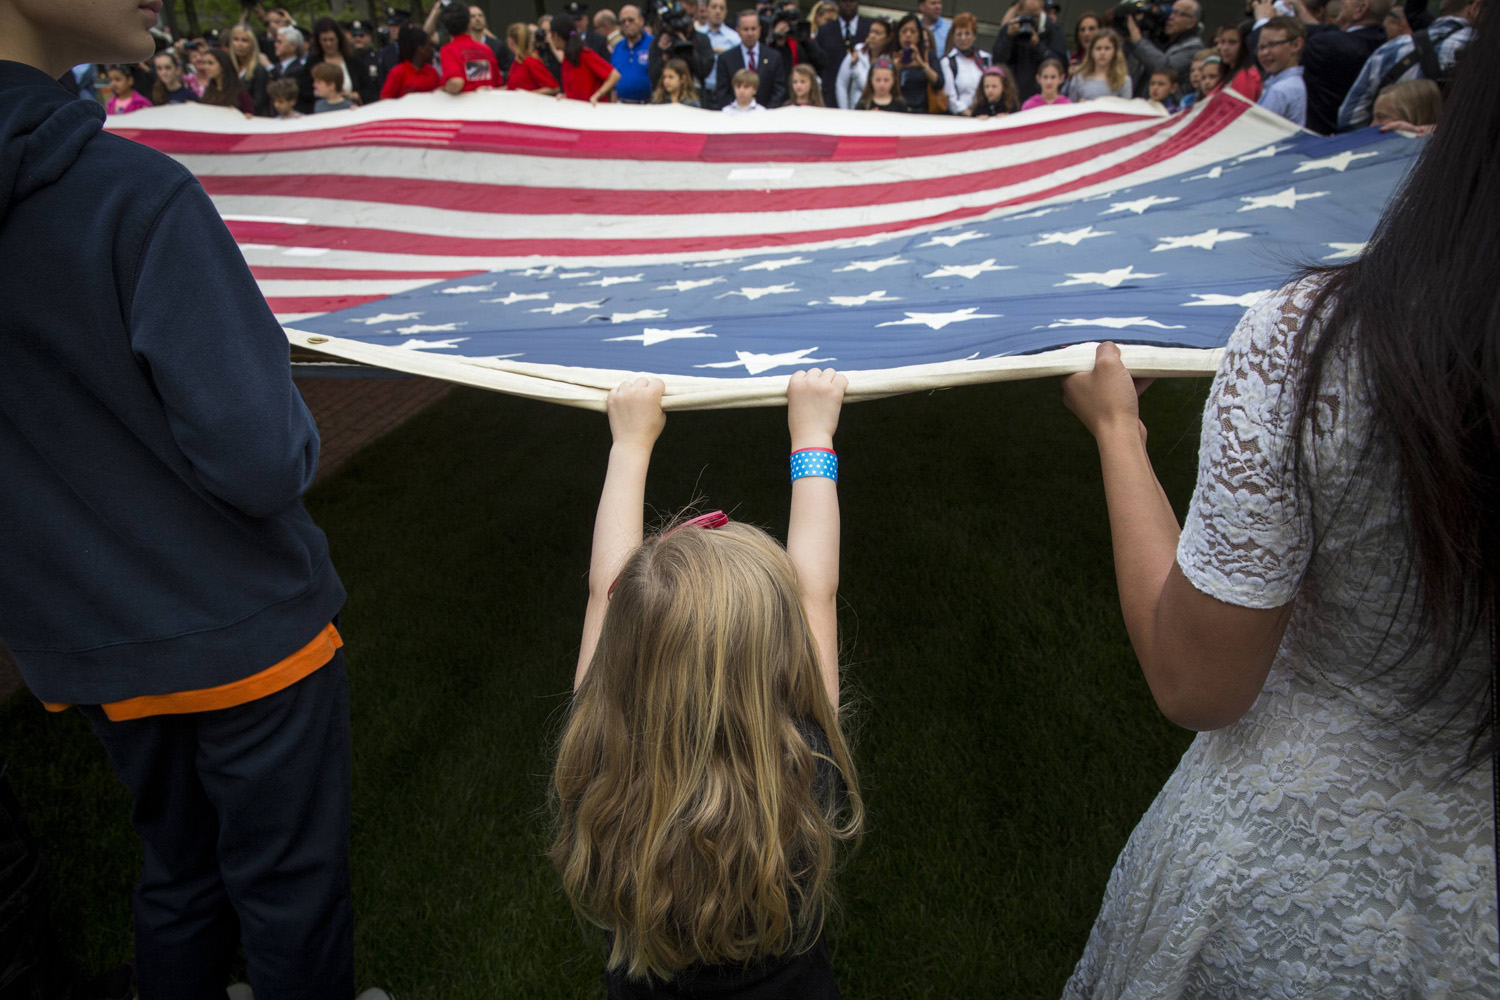 A girl designated to assist with transferring the National 9/11 Flag holds it aloft on the grounds of the 9/11 Memorial Plaza before donating it to the National September 11 Memorial Museum in New York